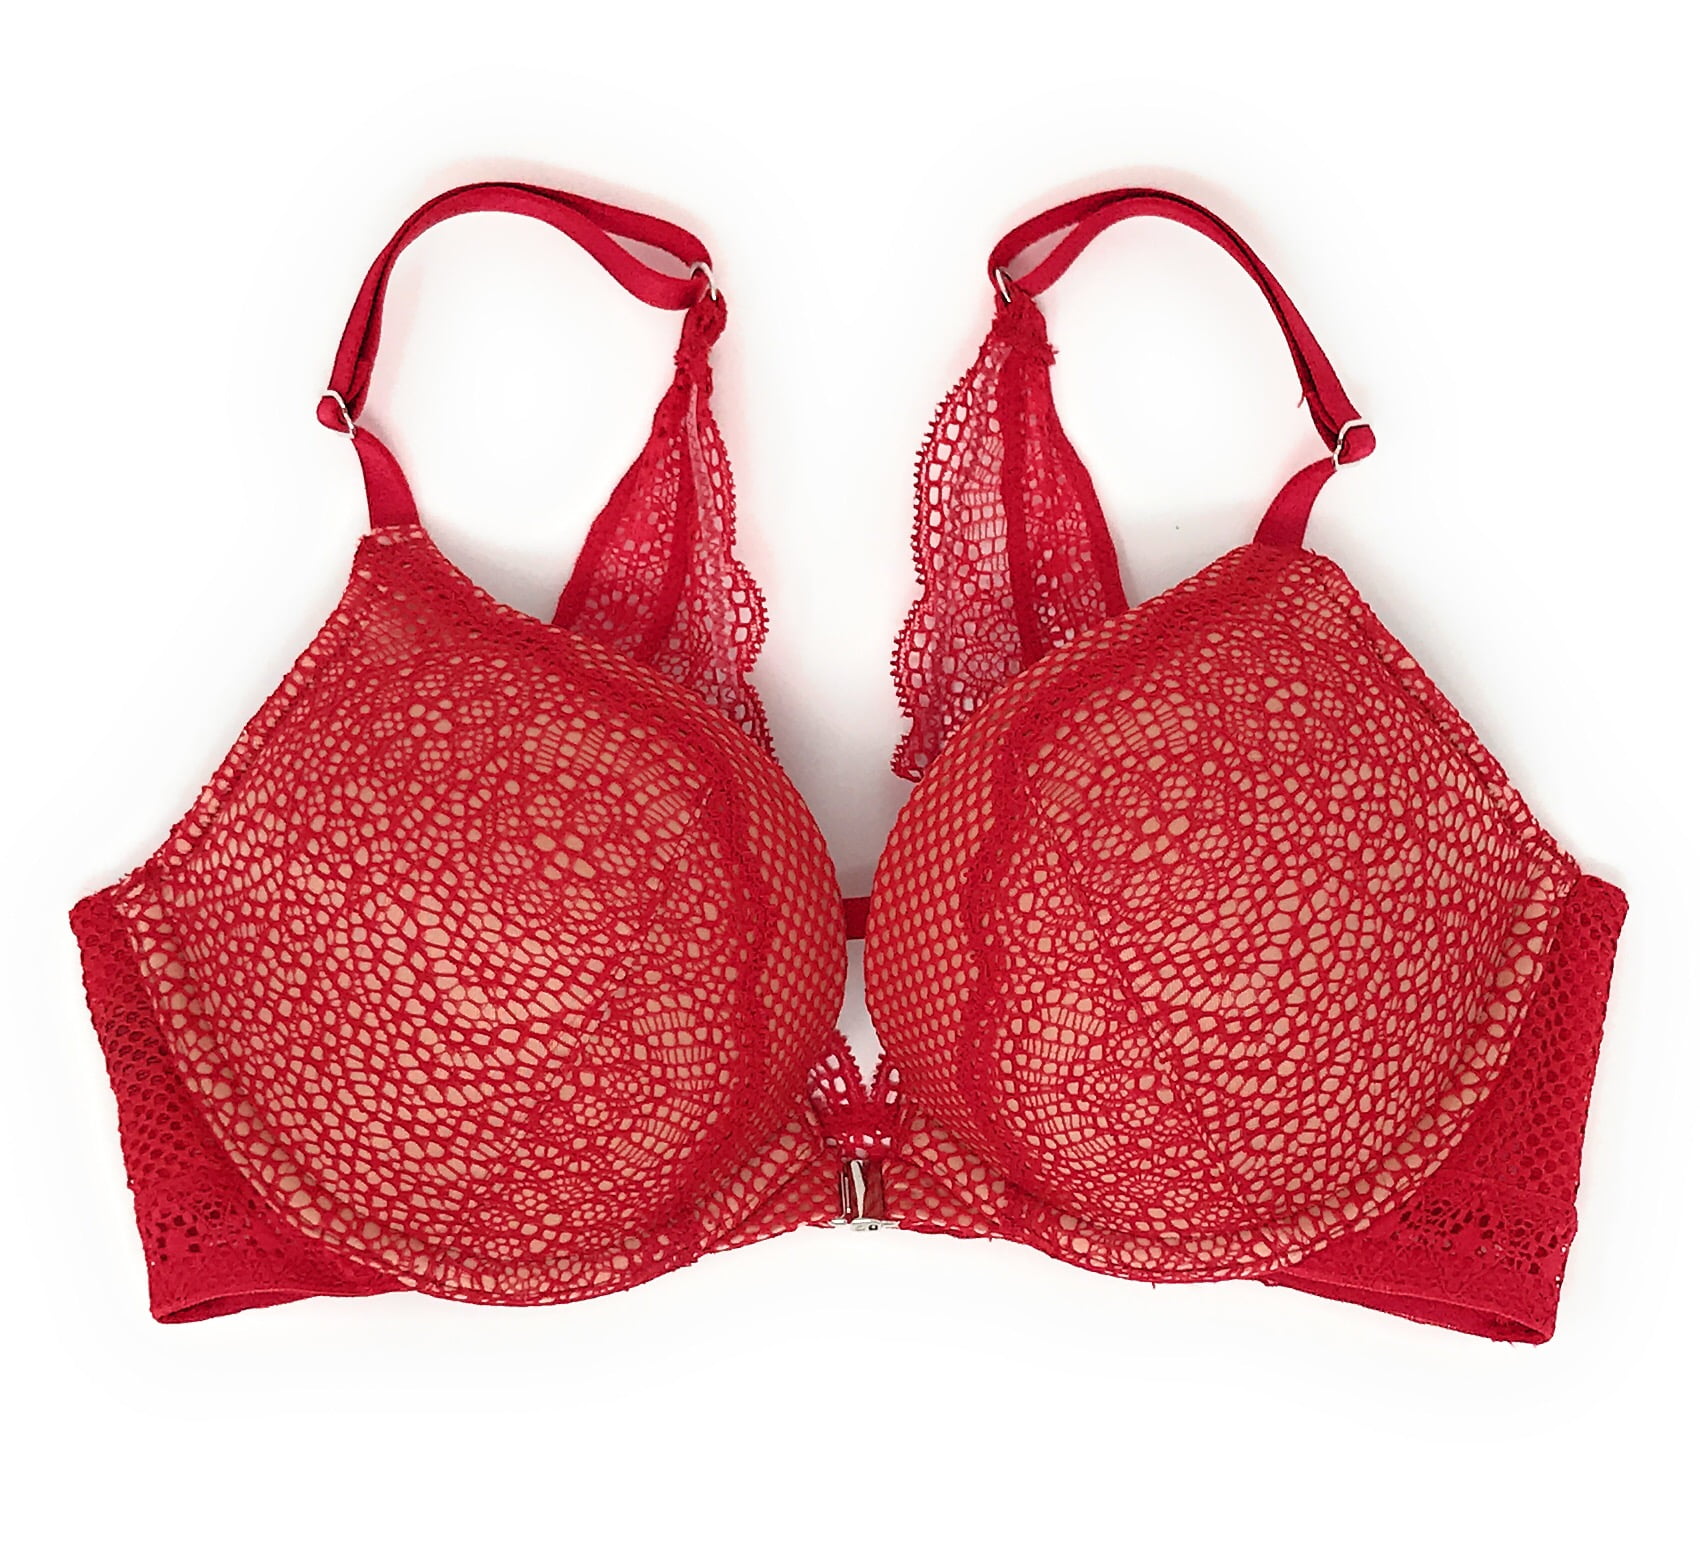 Victoria's Secret Bombshell Add-2-Cups Multi-Way Strapless Push-Up